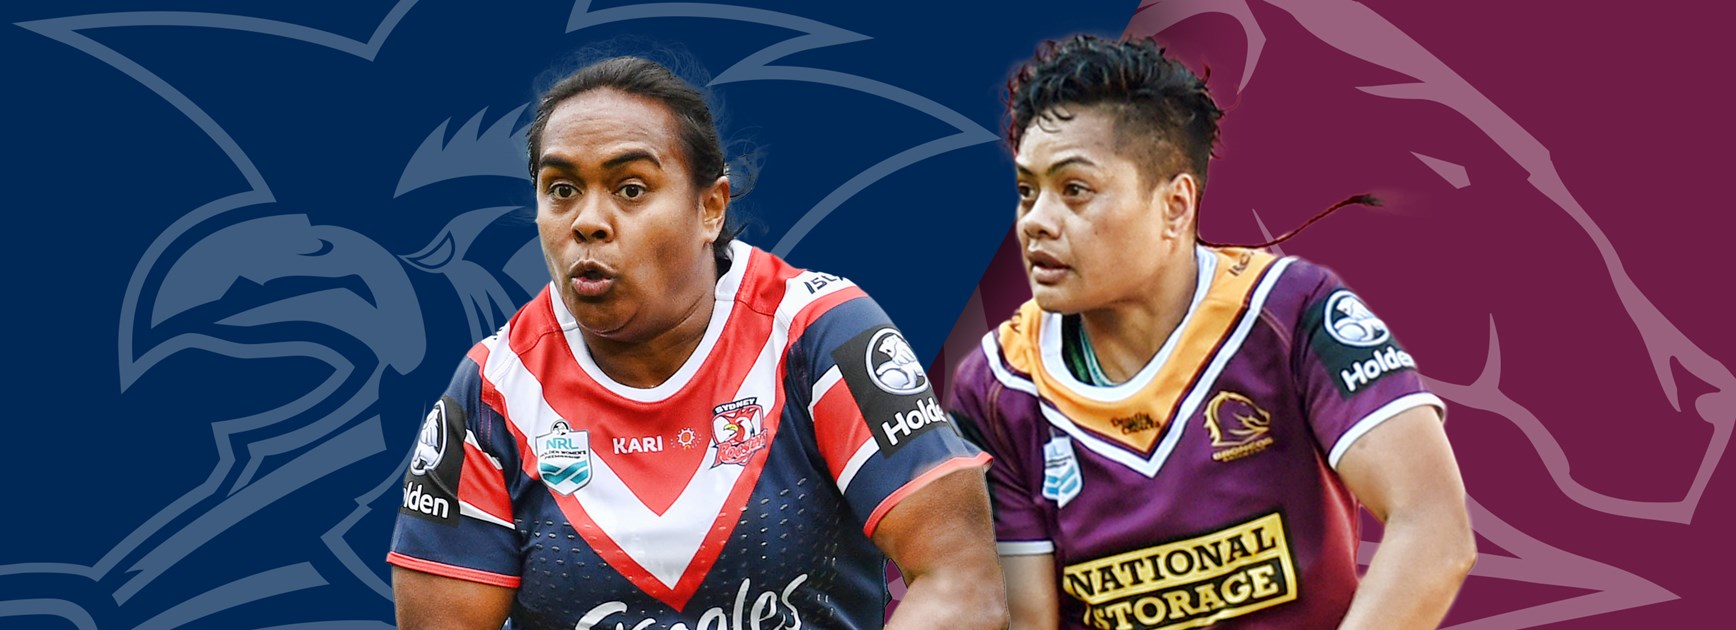 Roosters v Broncos: NRLW Round 2 preview